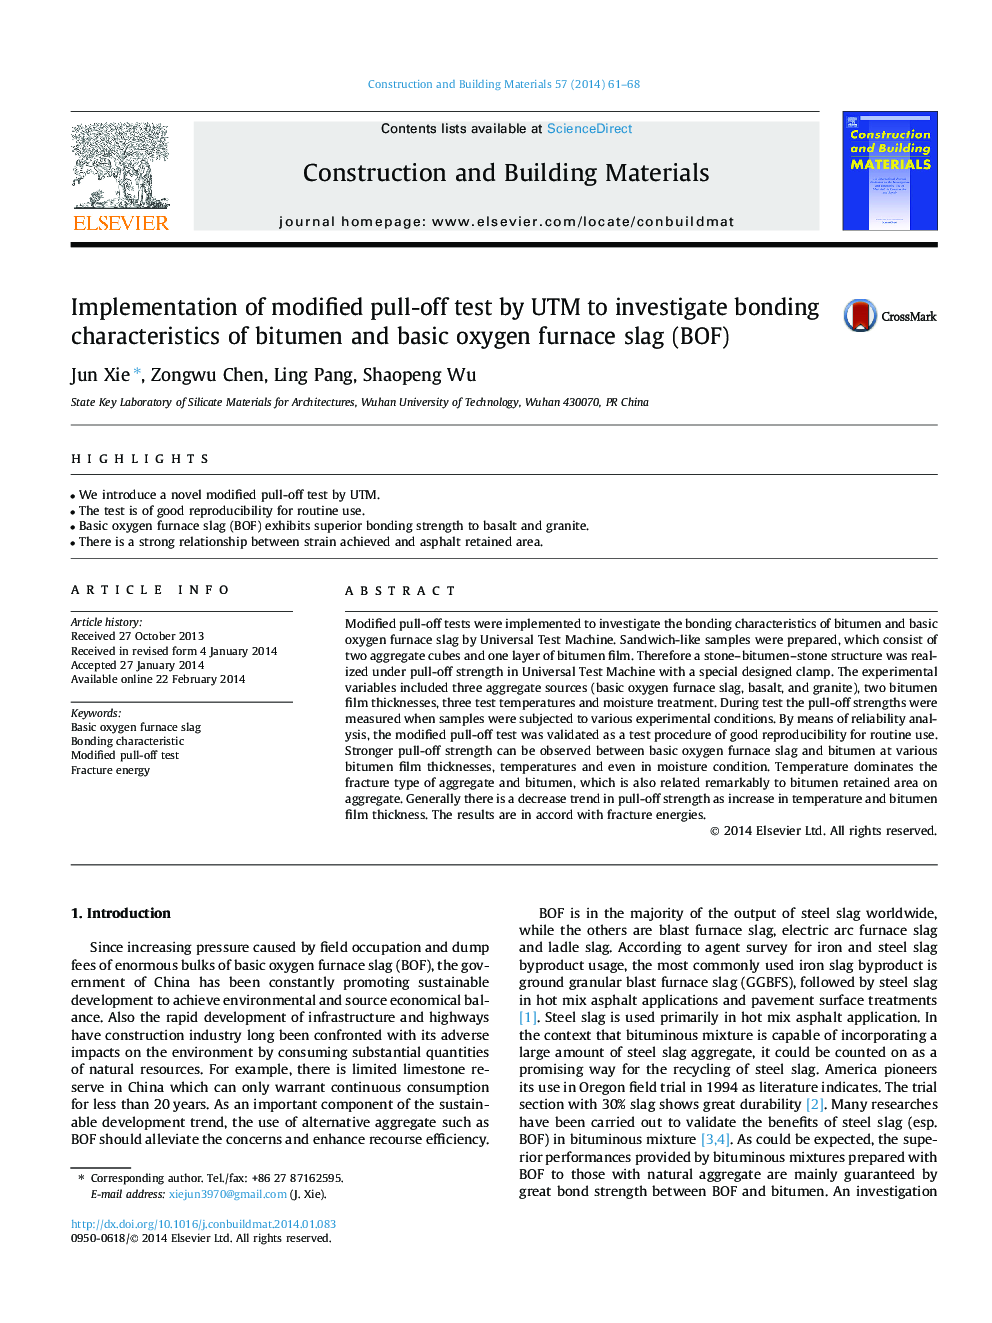 Implementation of modified pull-off test by UTM to investigate bonding characteristics of bitumen and basic oxygen furnace slag (BOF)